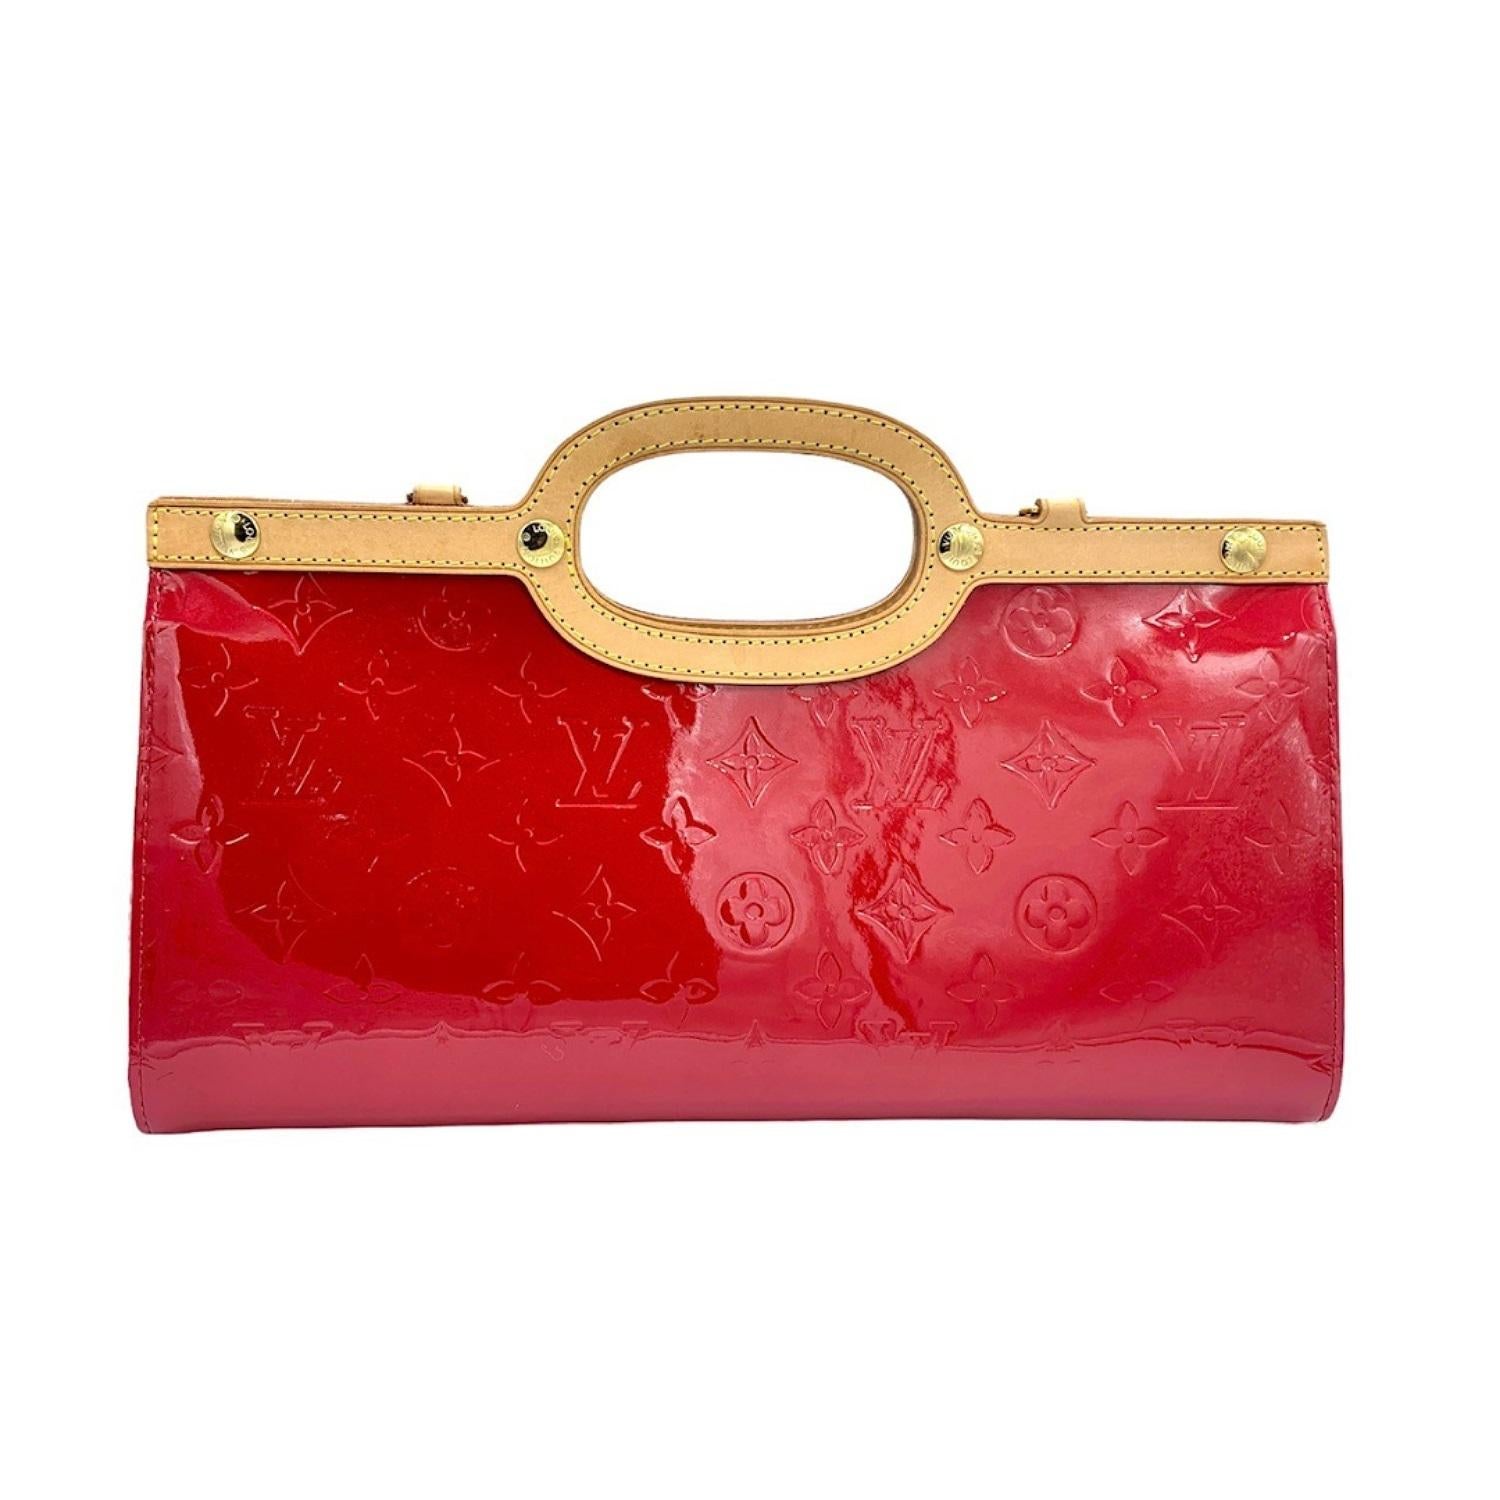 This chic handbag tote is crafted of Louis Vuitton monogram embossed vernis patent leather in the distinctive bright red color. The bag features a top crest of vachetta cowhide leather with cutaway top handles and brass hardware. The top unsnaps to